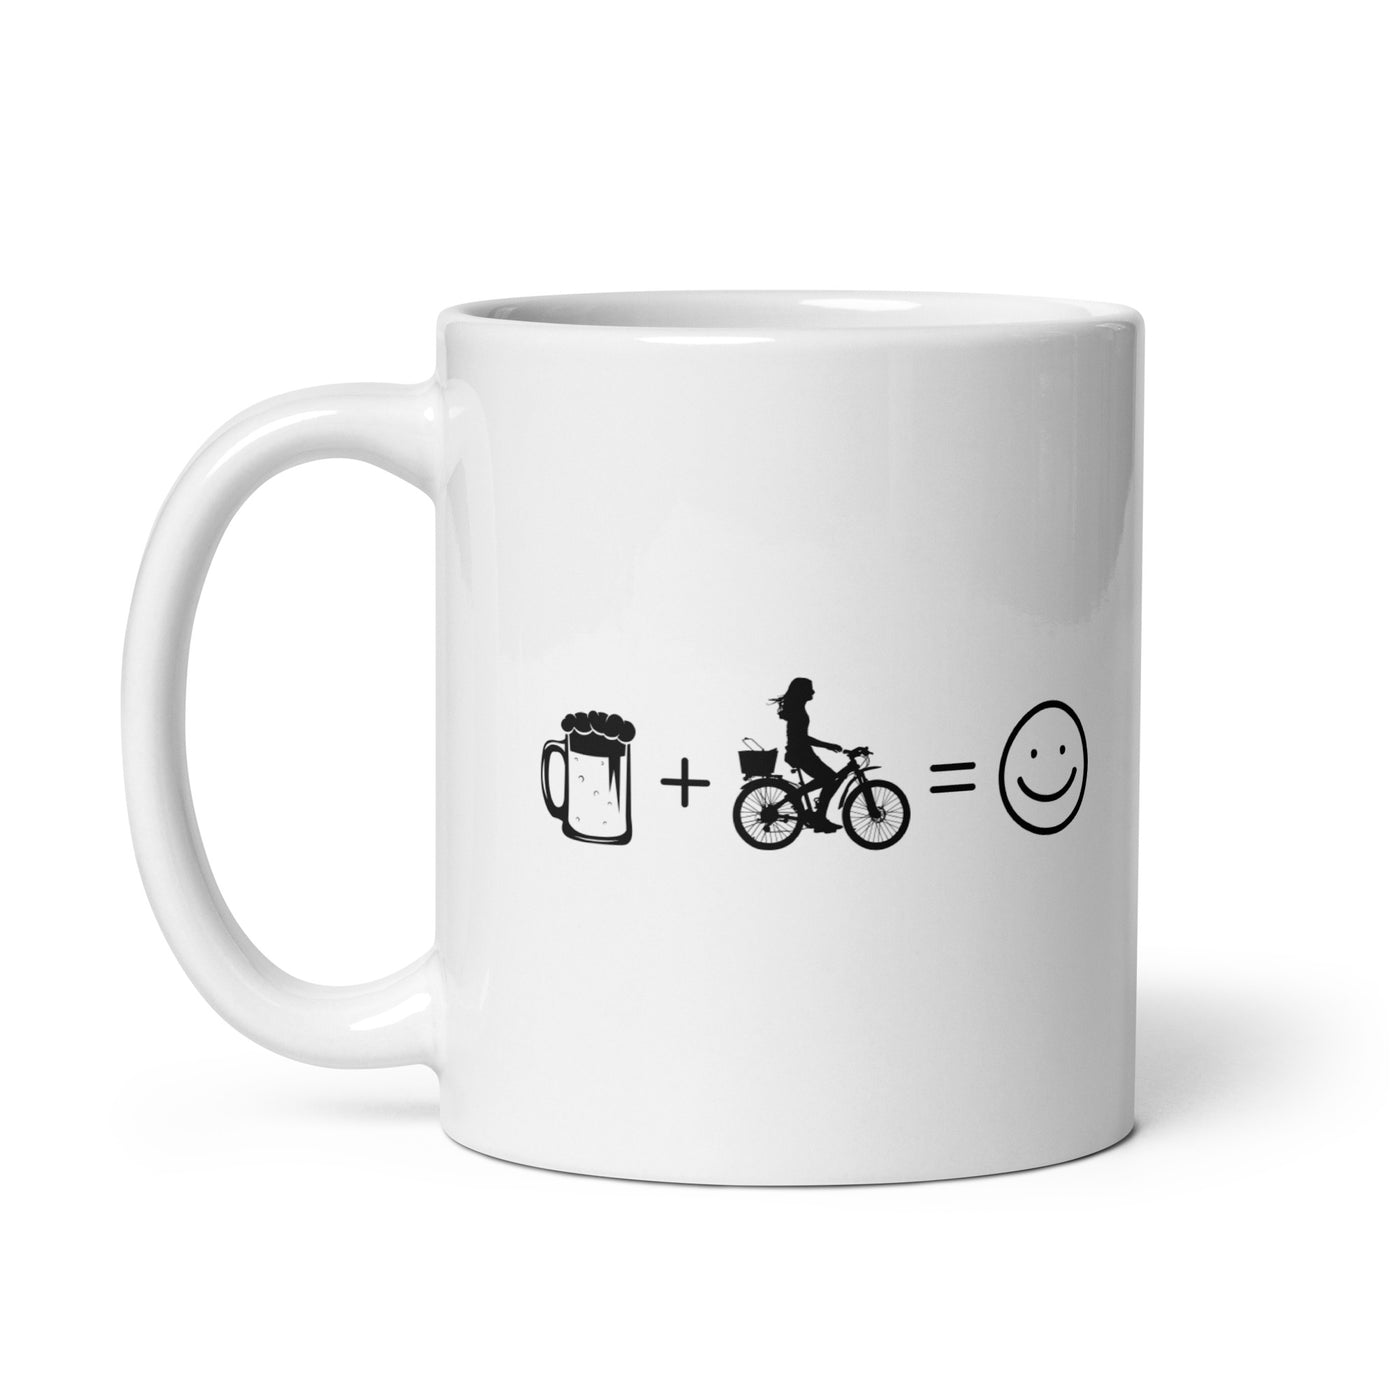 Beer Smile Face And Cycling 2 - Tasse fahrrad 11oz